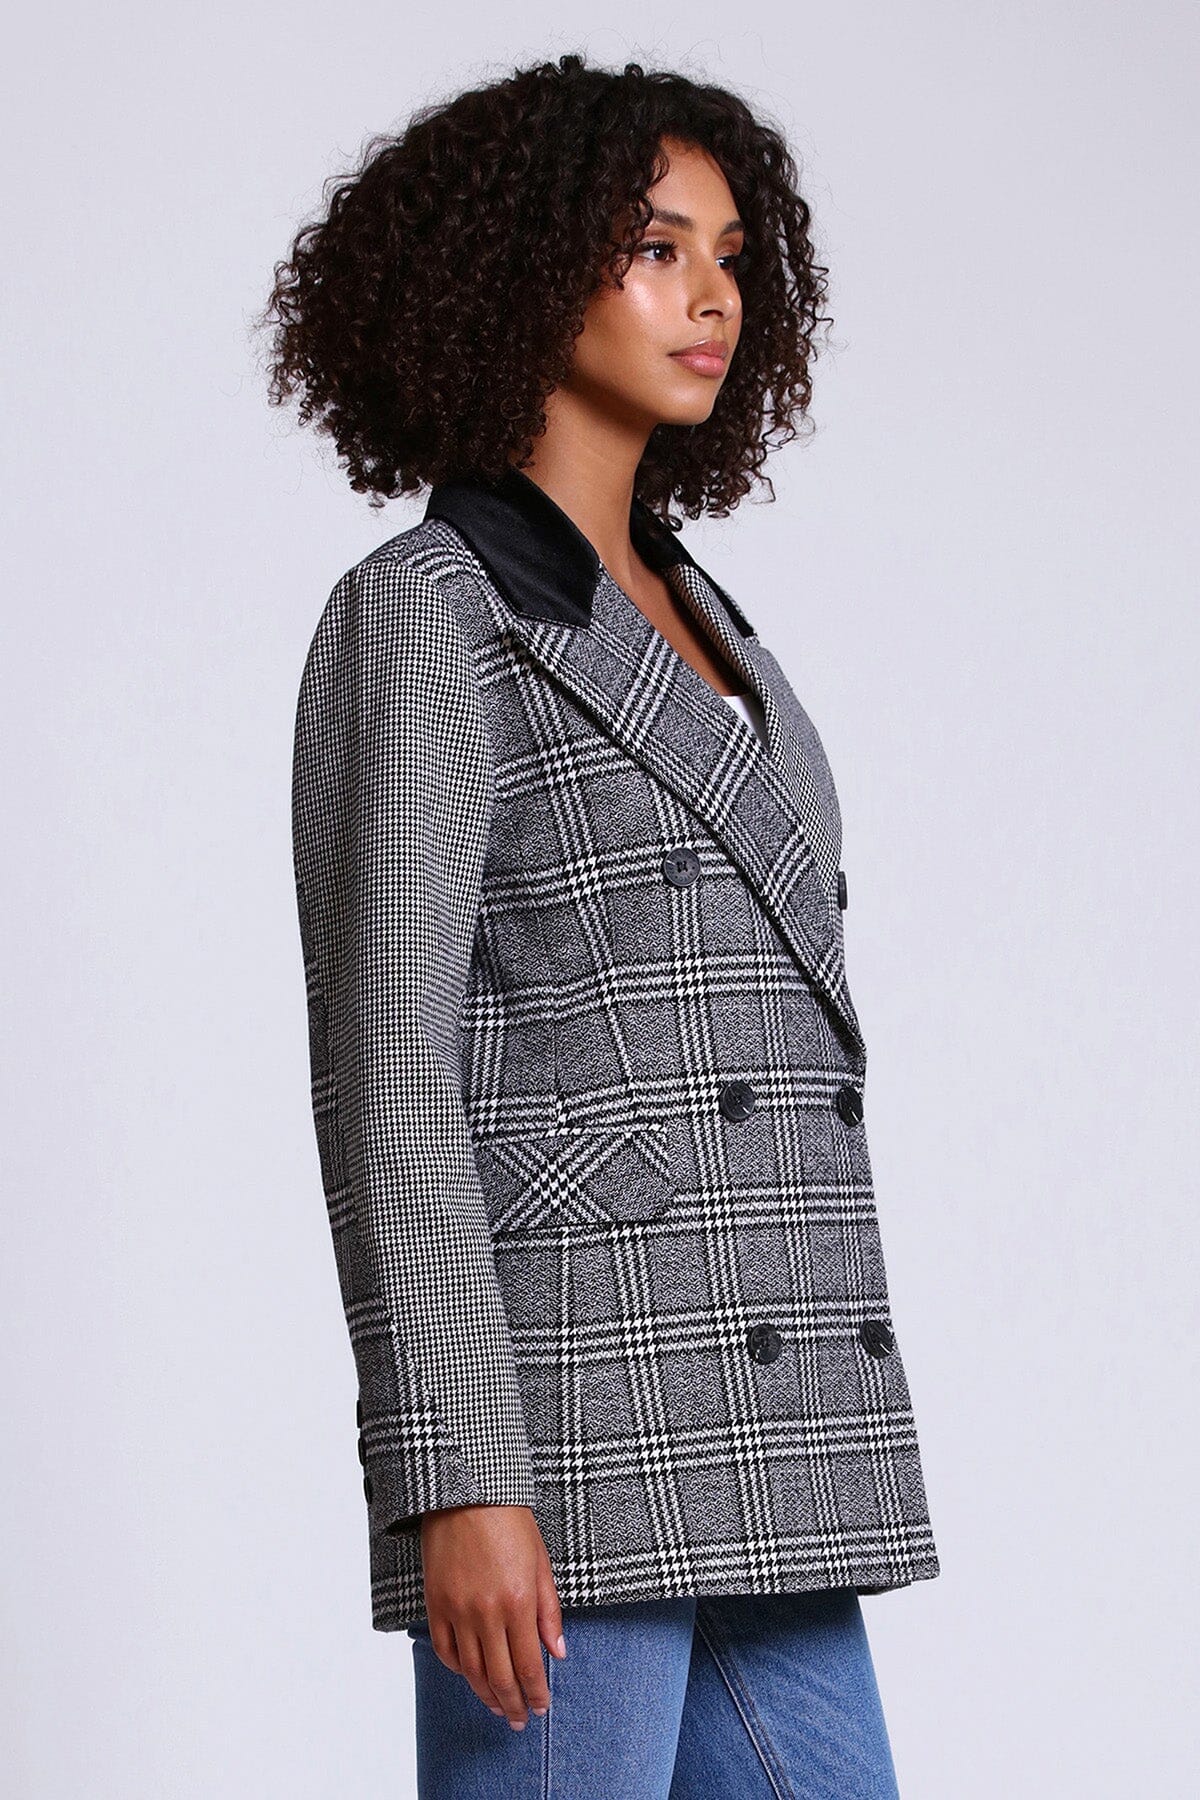 houndstooth mixed media plaid double breasted blazer coat jacket - figure flattering date night blazers outerwear for women 